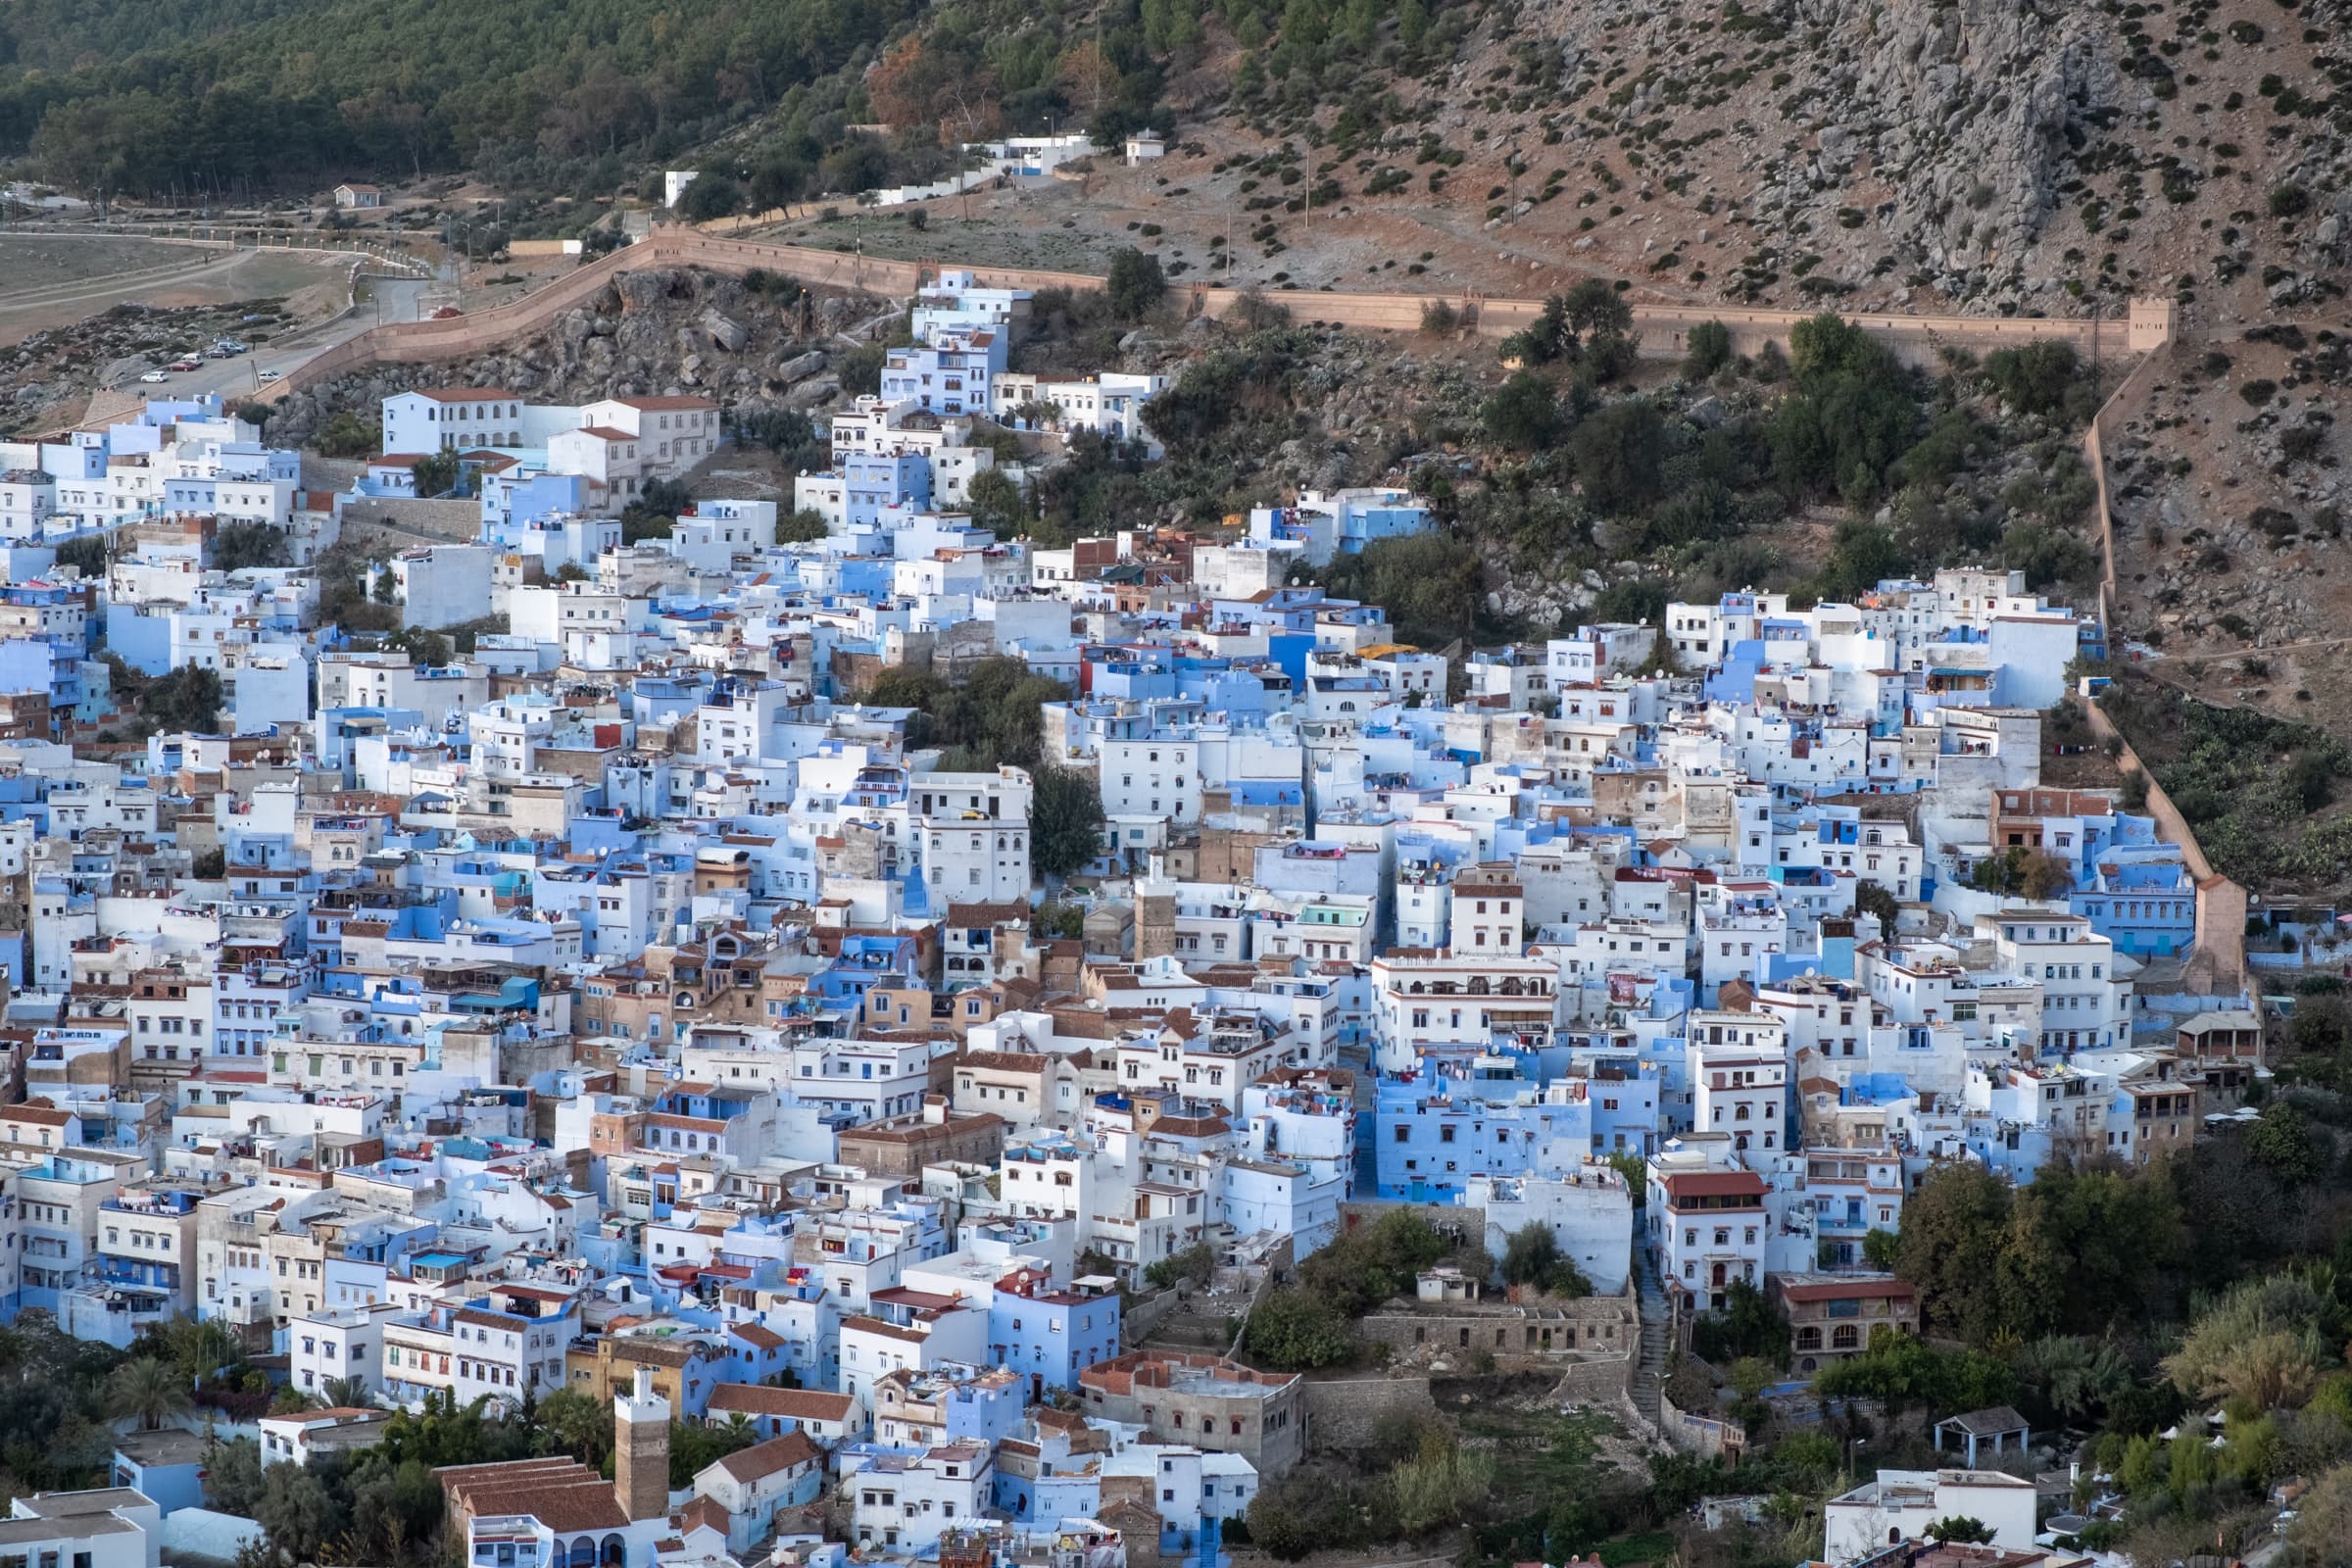 Chefchaouen, Morocco from the Spanish Mosque